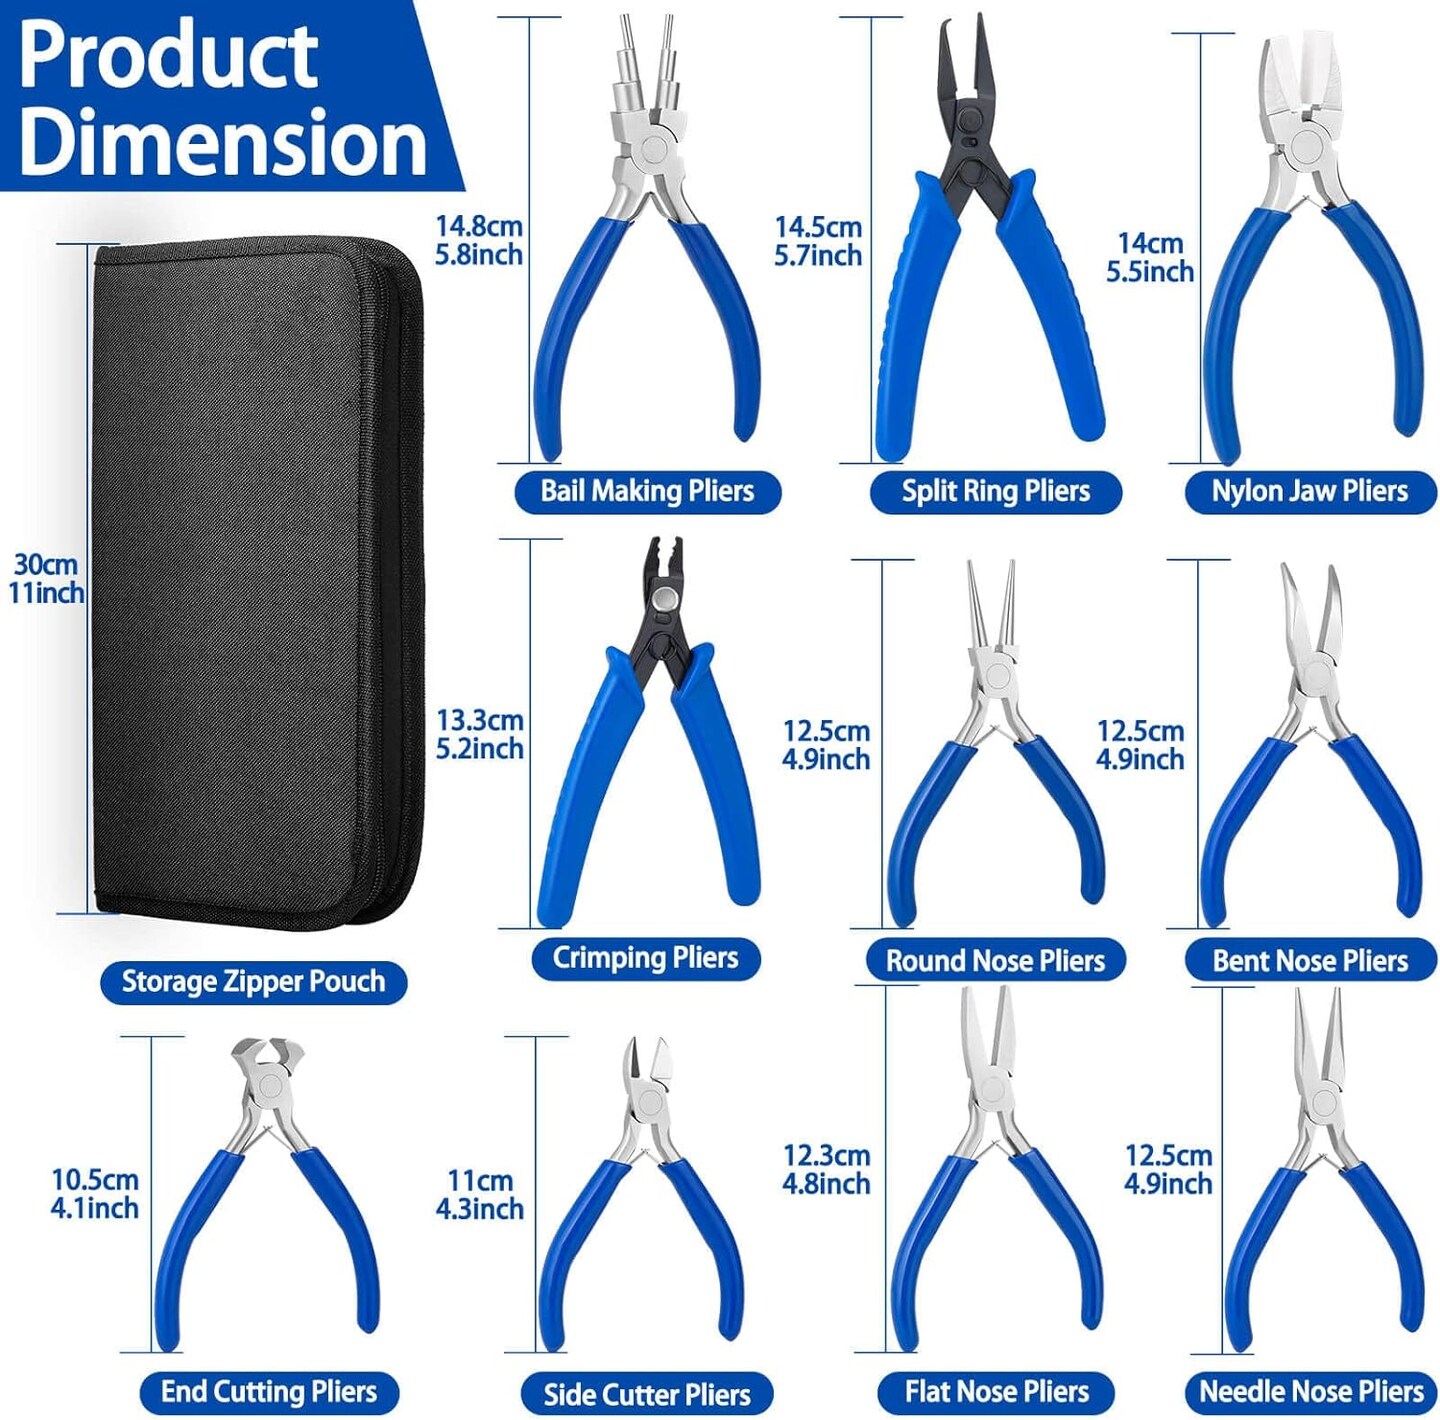 Jewelry Pliers, Set of 10 Professional Jewelry Making Pliers Tools for Craft, Wire Wrapping